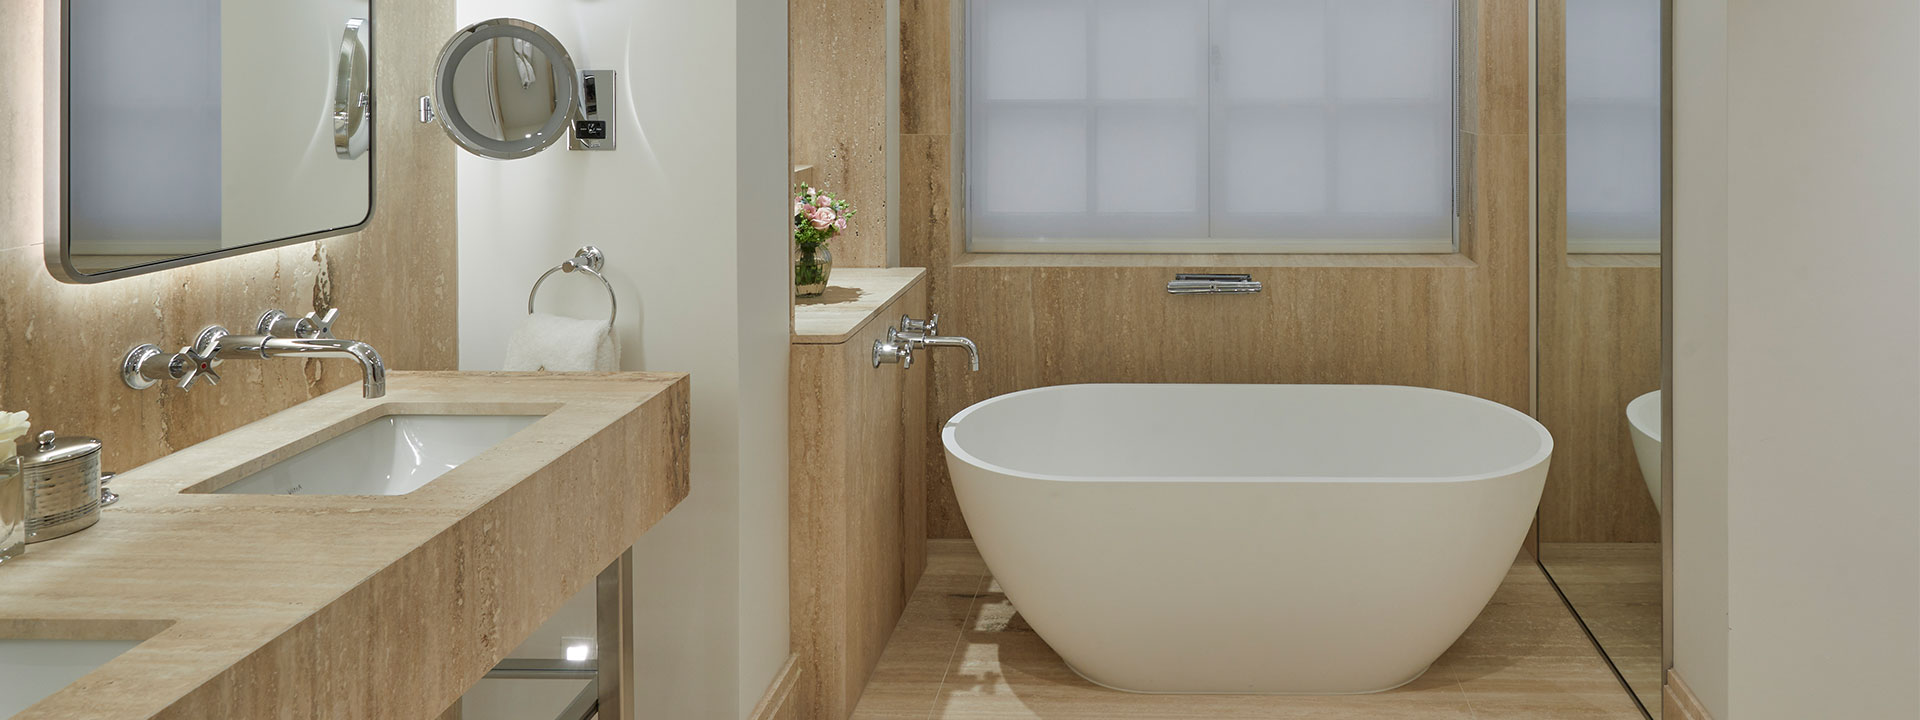 A modern bathroom, gently lit, with a large bathtub in an interior design of neutral tones for complete enjoyment.